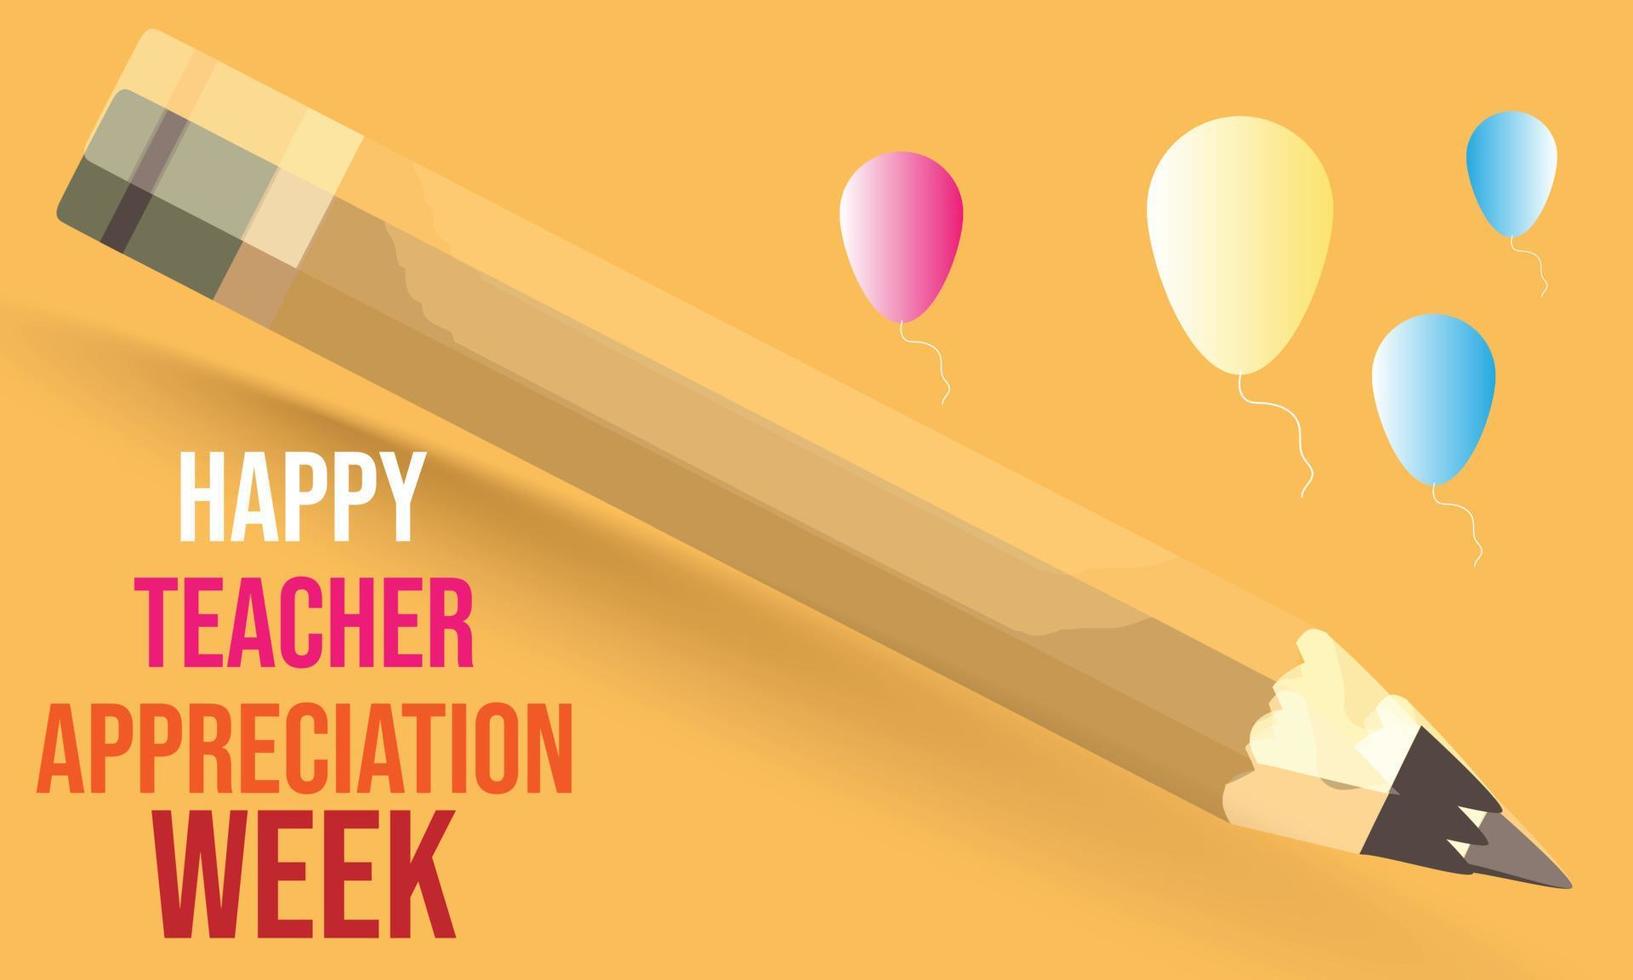 May is Teacher Appreciation Week. Template for background, banner, card, poster. Vector illustration.